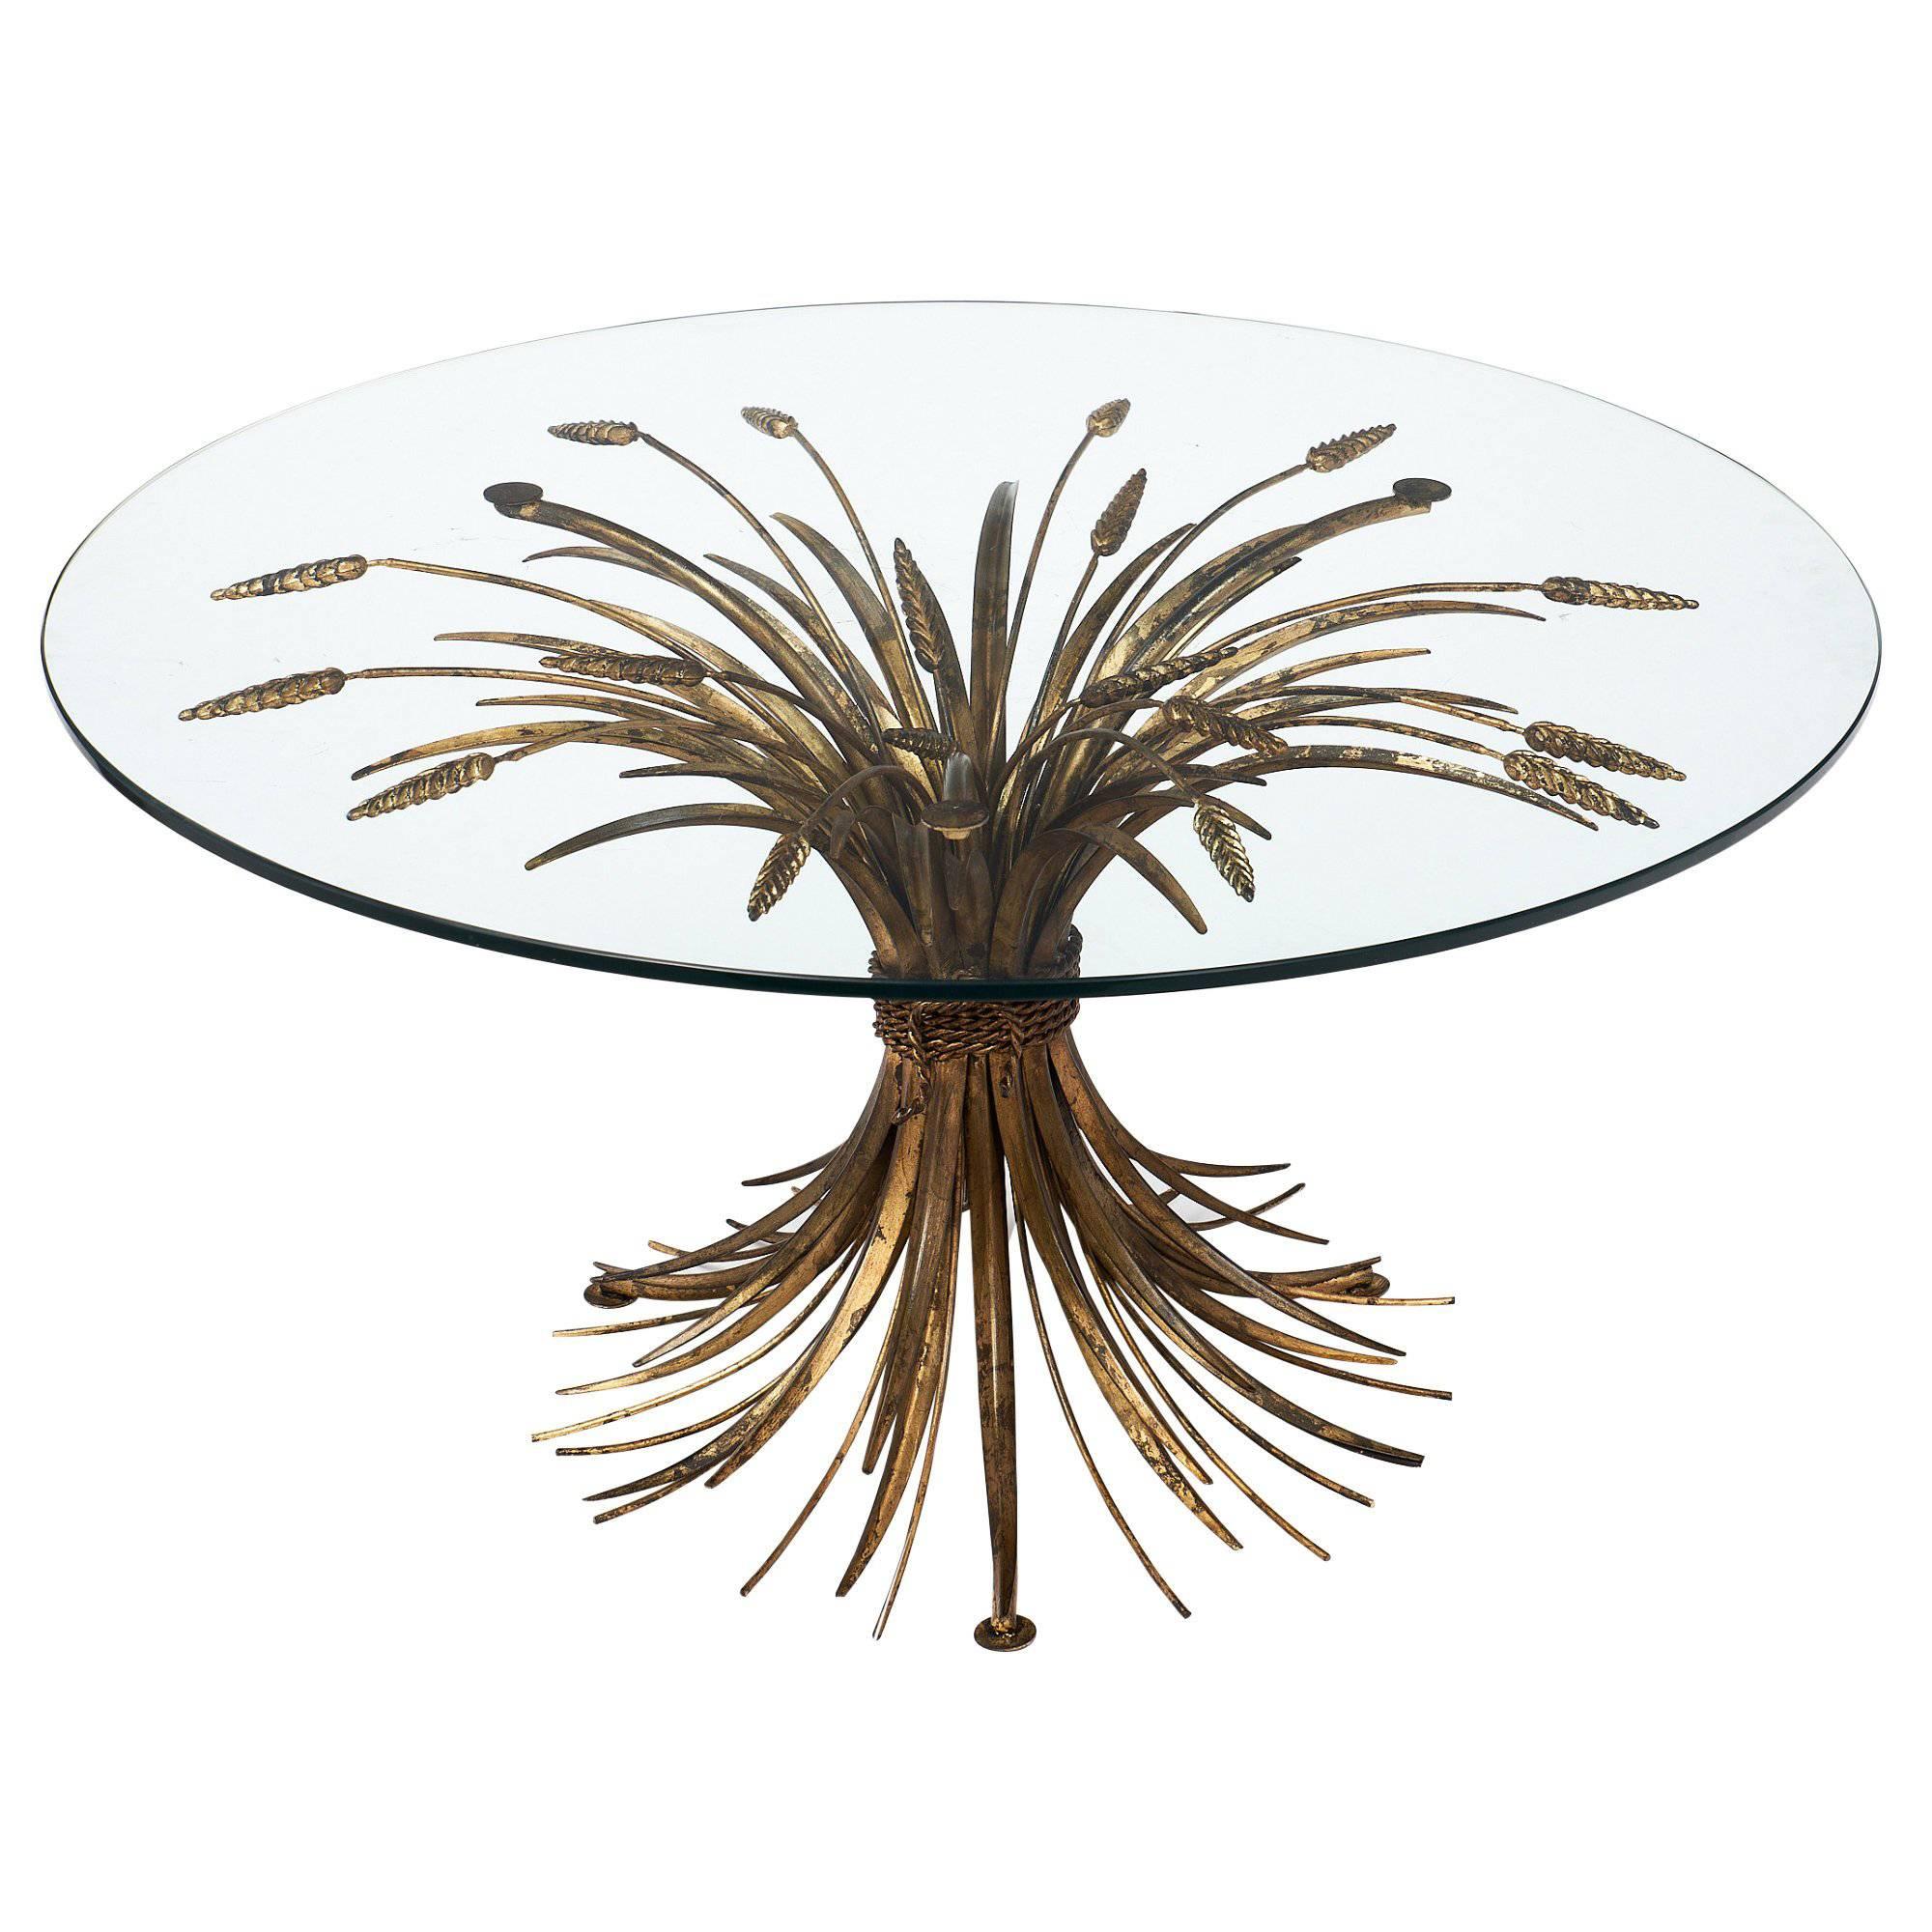 ‘Sheaf of Wheat’ Vintage Coco Chanel Coffee Table